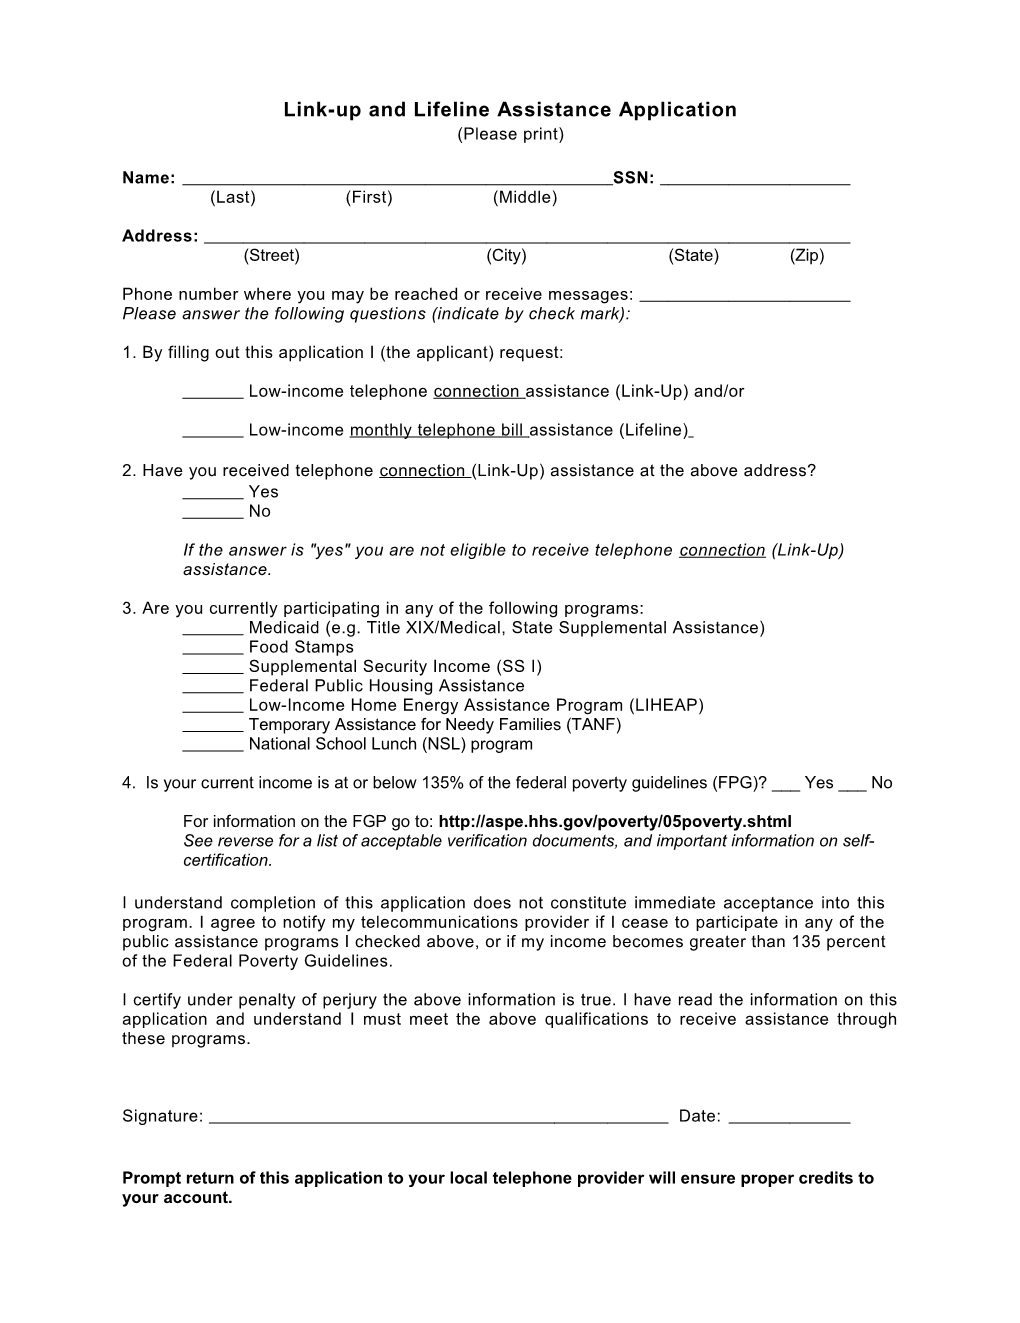 Low-Income Telephone Assistance Application